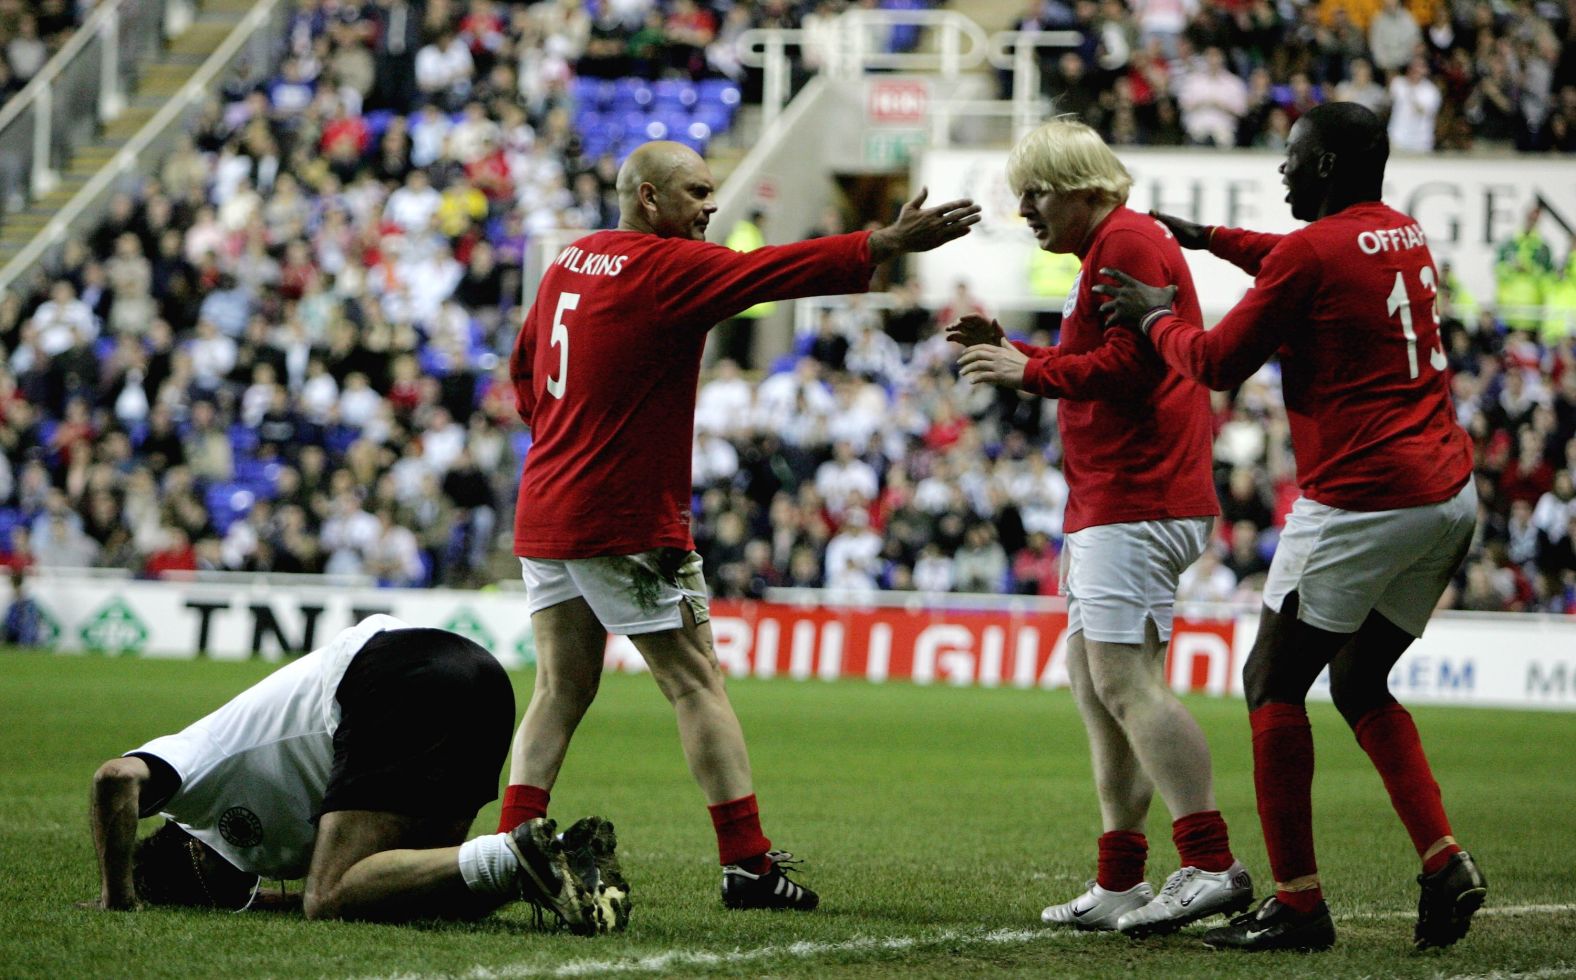 Johnson looks apologetic after fouling Germany's Maurizio Gaudino during a charity soccer match in Reading, England, in May 2006.